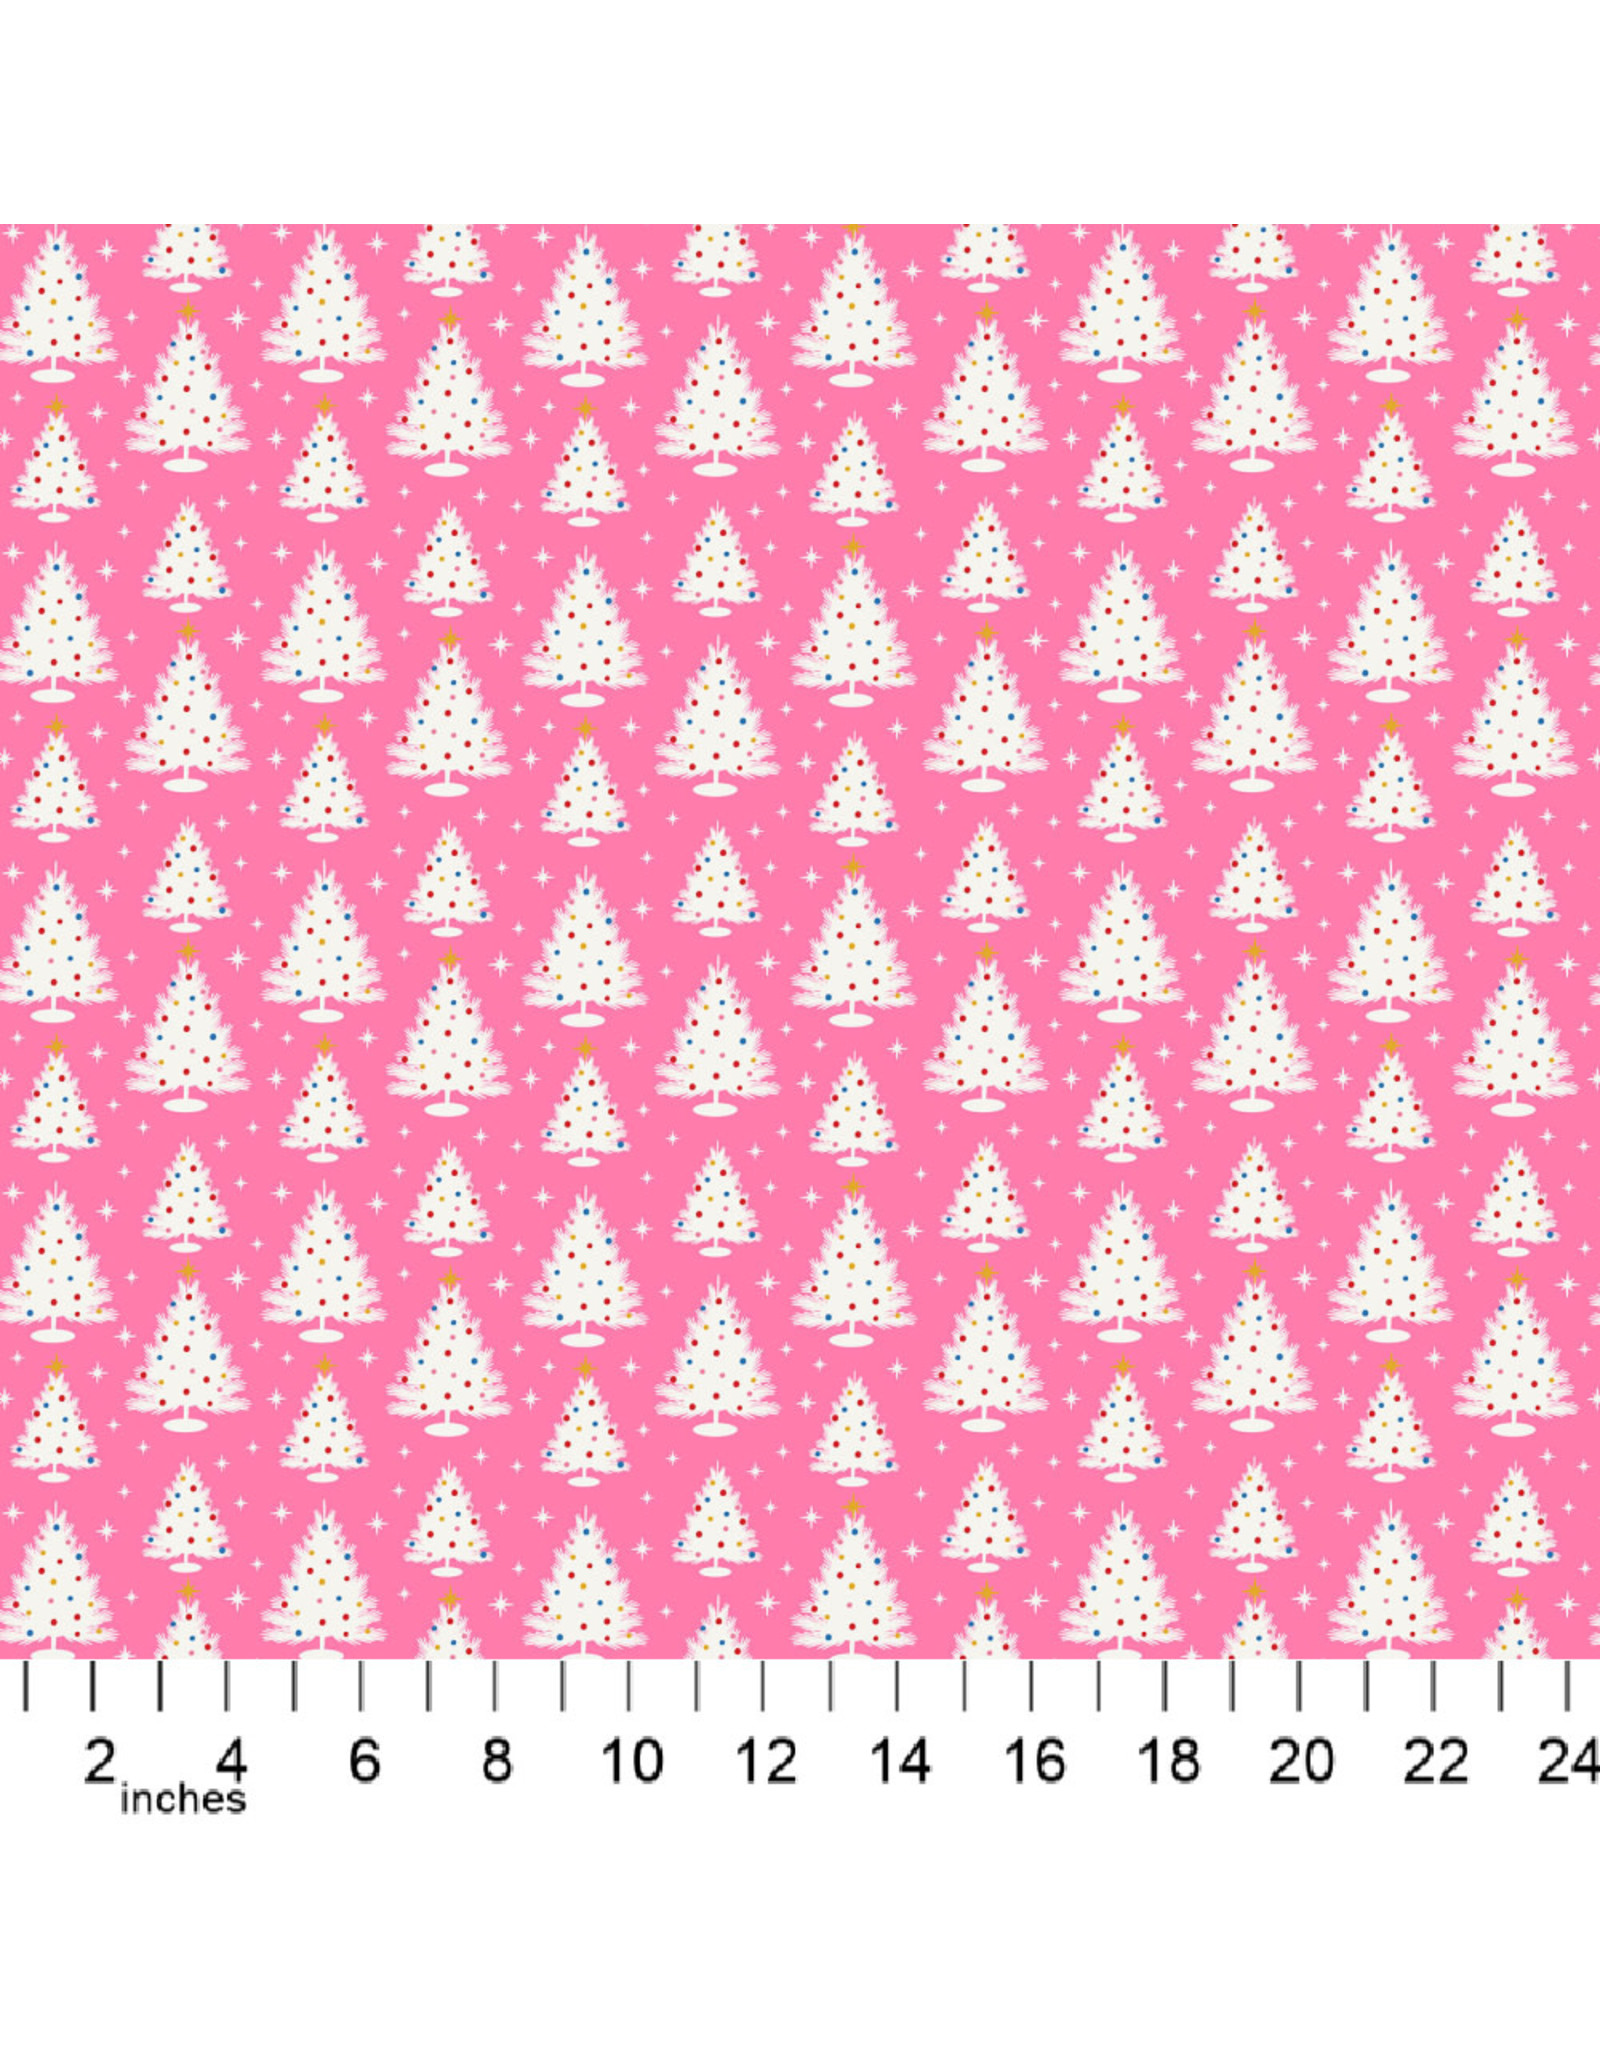 Figo Peppermint, Trees in Pink, Fabric Half-Yards